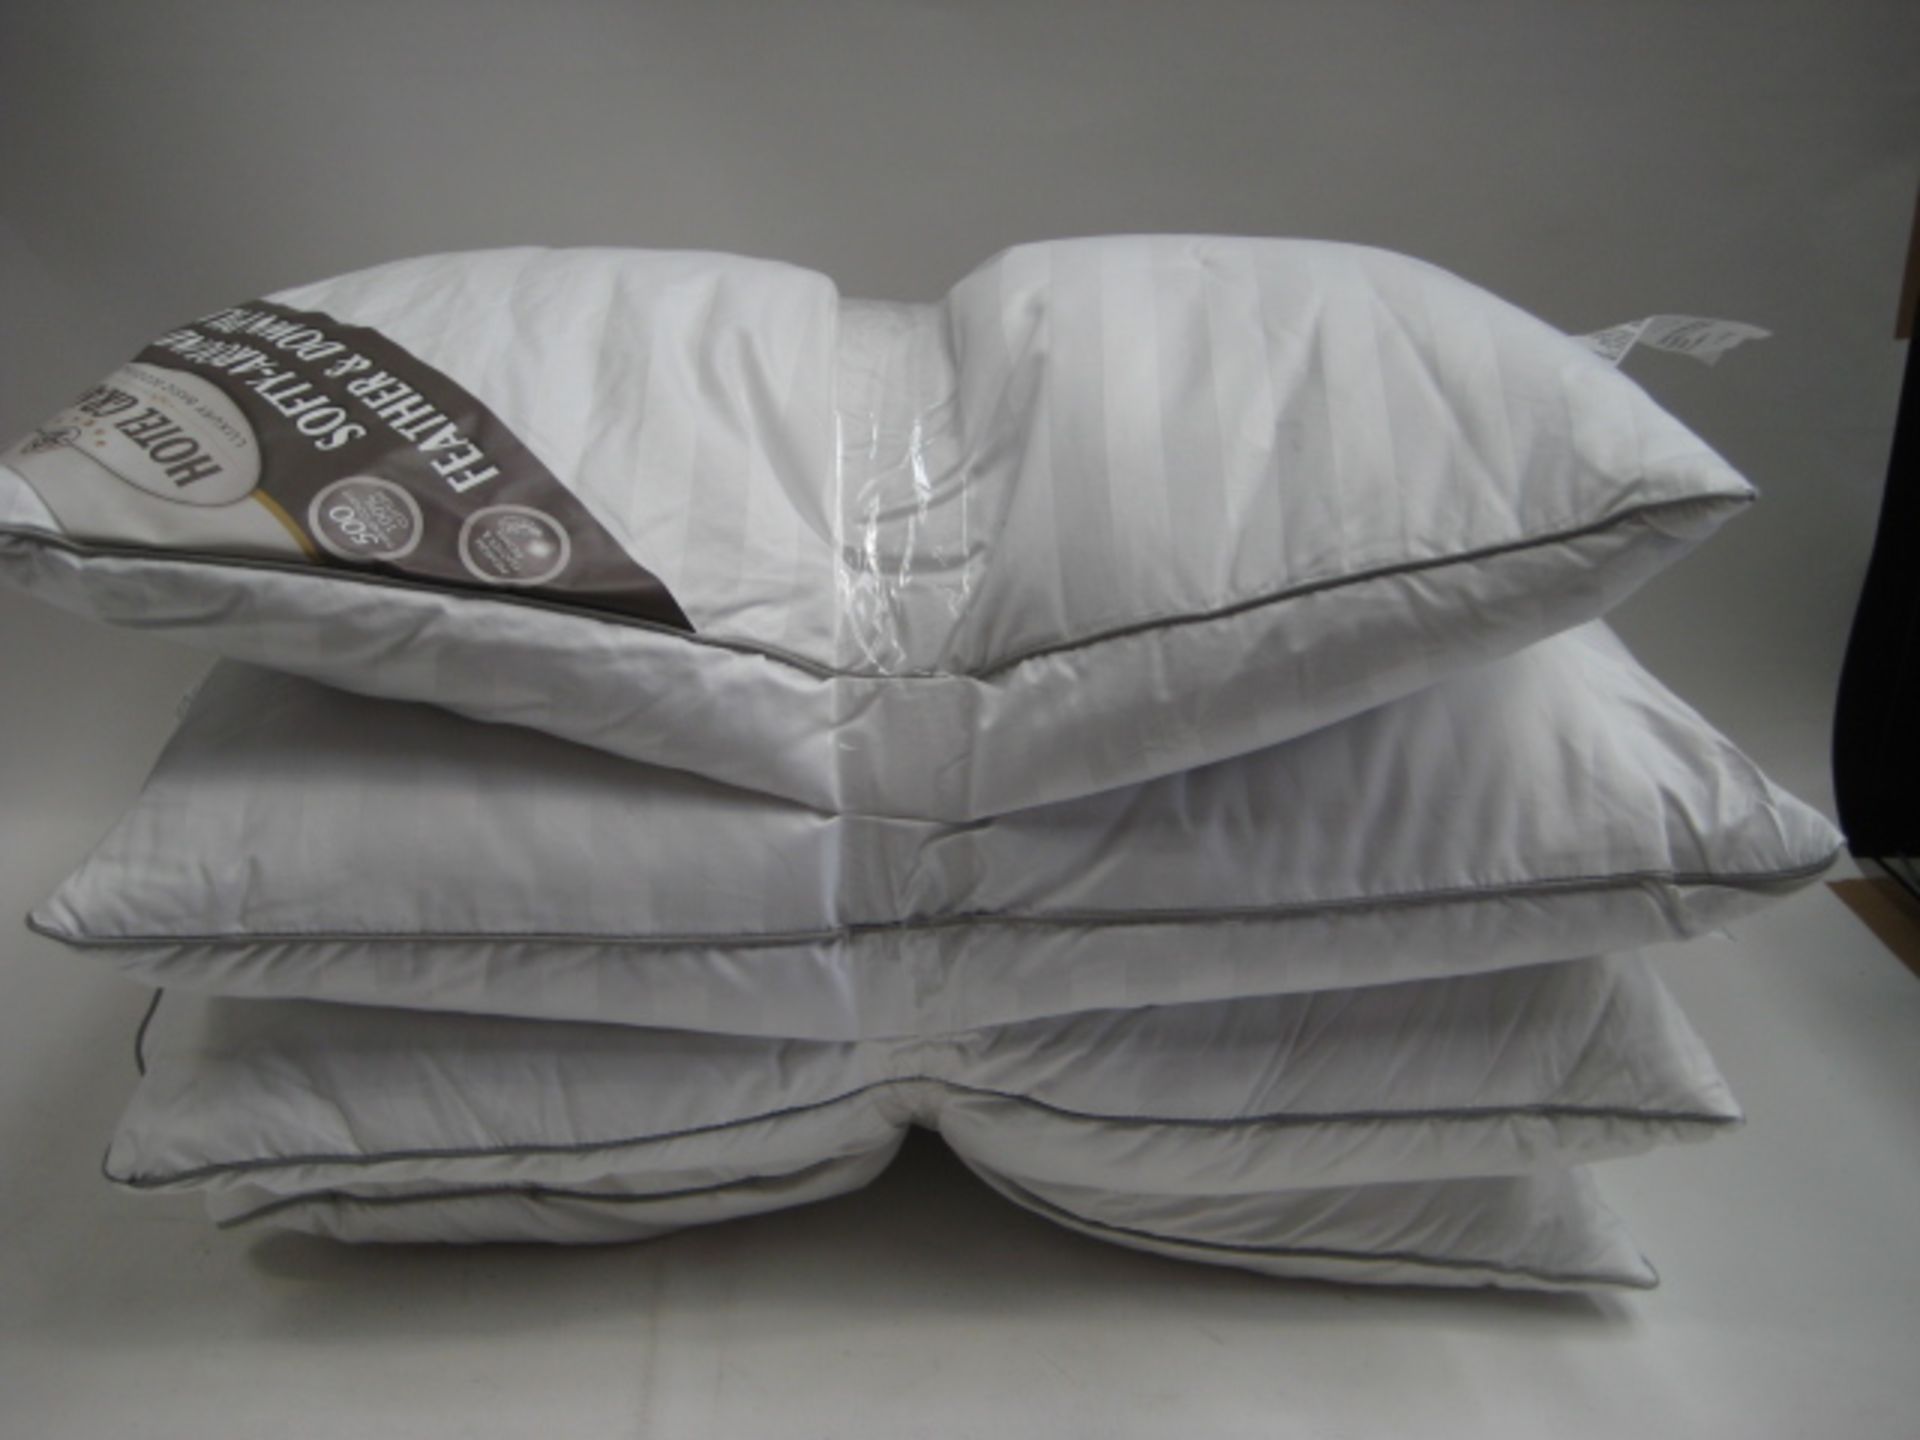 Bundle of 4 Hotel Grand feather and down pillows